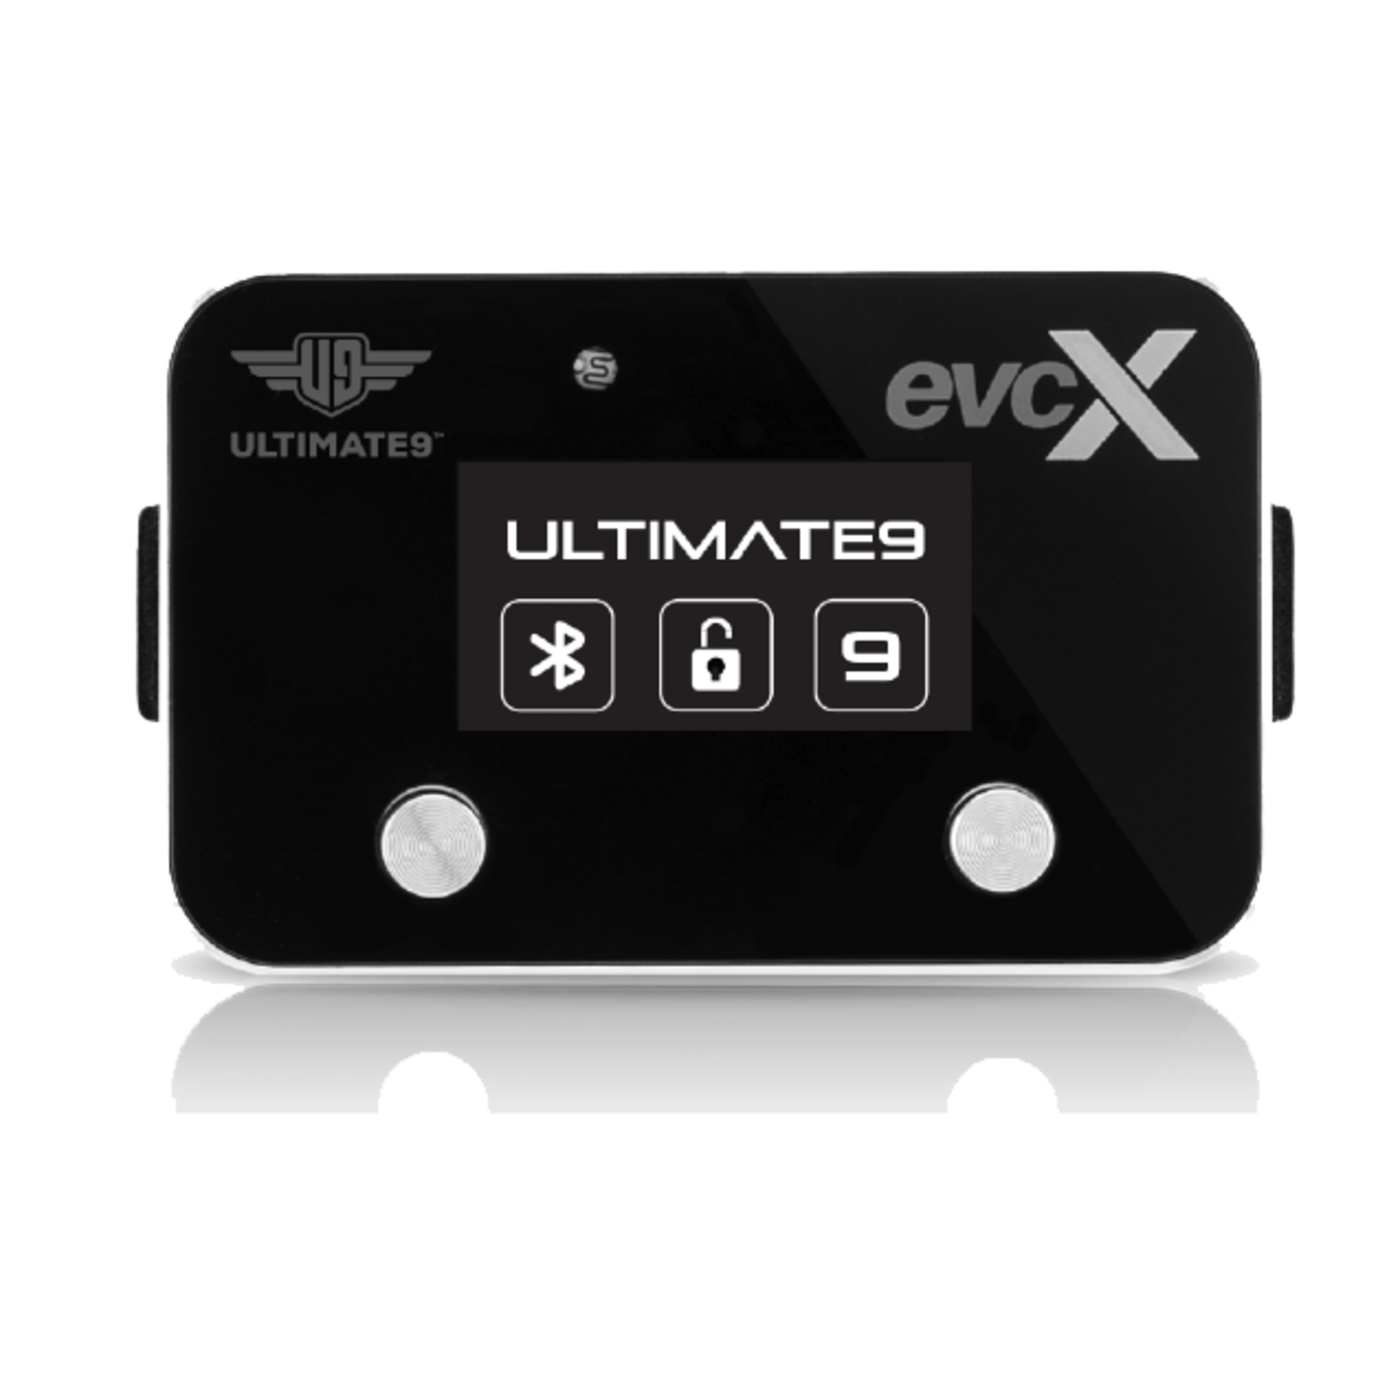 EVCX Throttle Controller to Suit Various Buick, Cadillac, Chevrolet, GMC, Holden & Opel vehicles - OZI4X4 PTY LTD